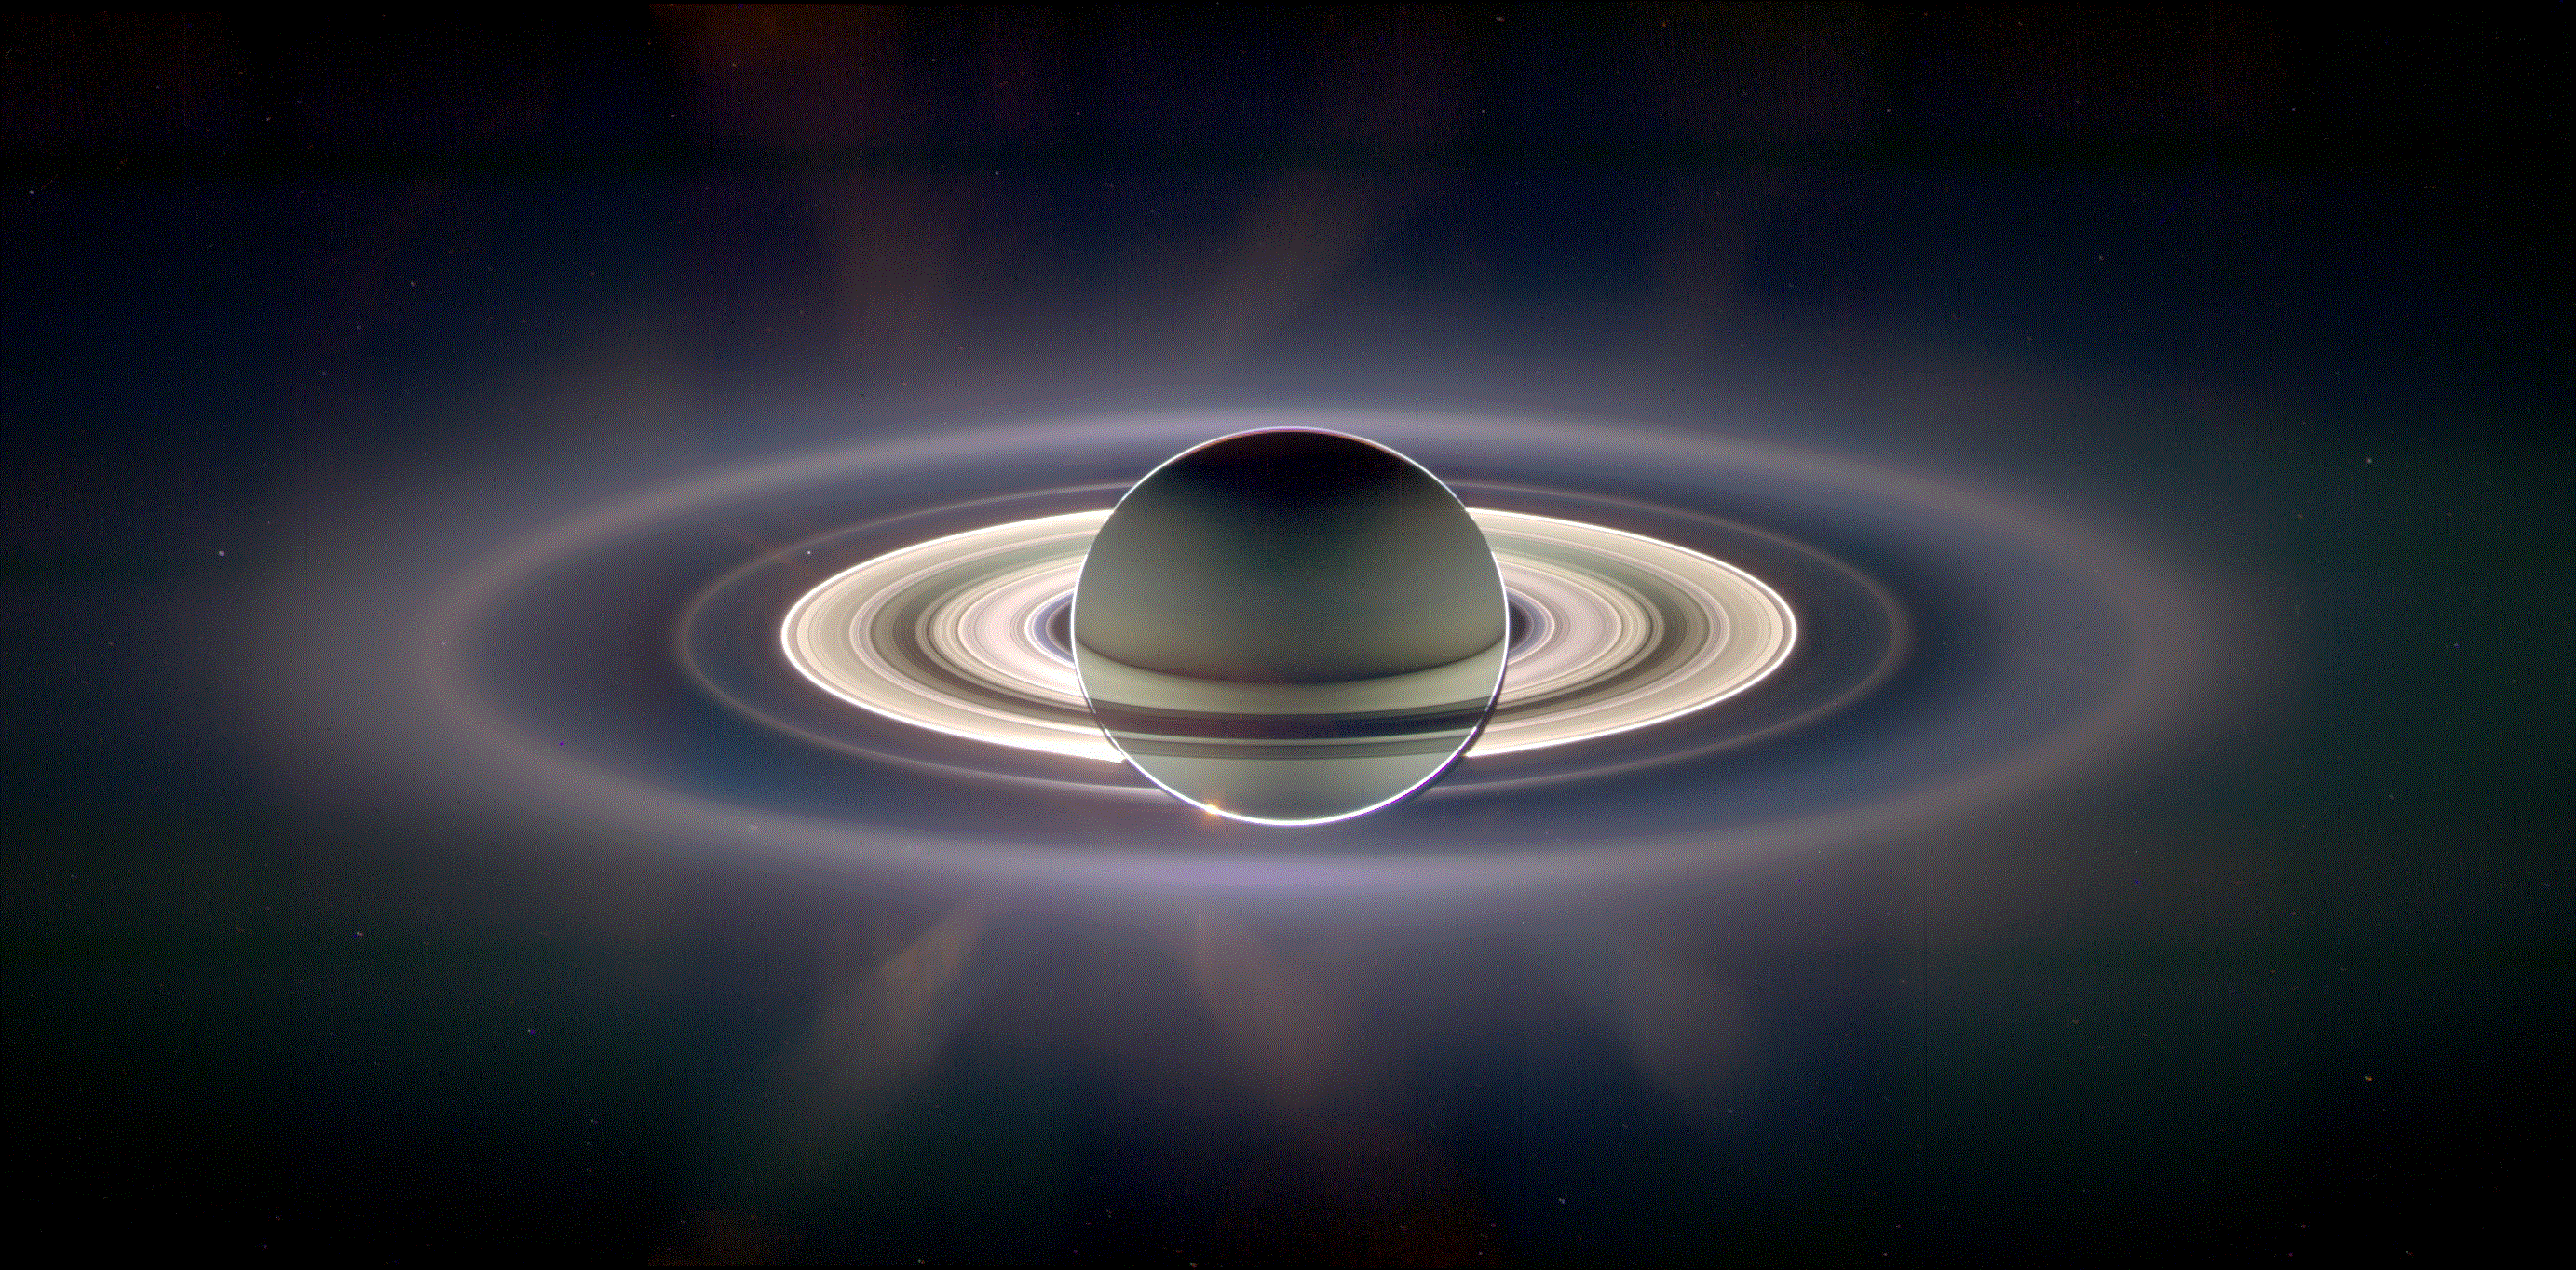 Saturn's E-ring